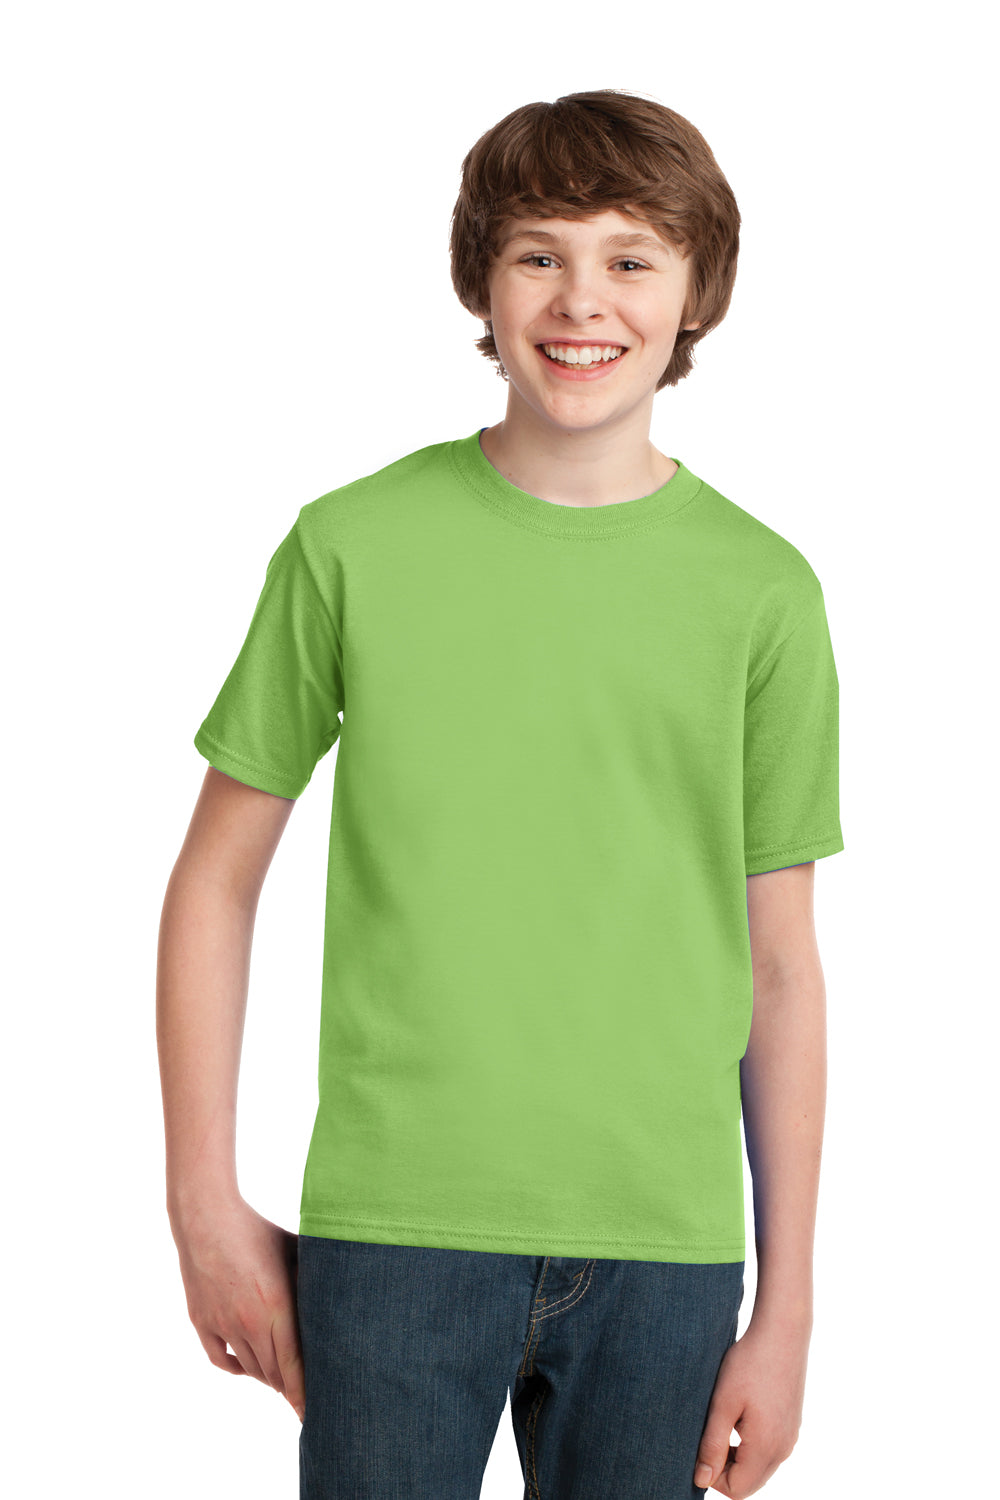 Port & Company PC61Y Youth Essential Short Sleeve Crewneck T-Shirt Lime Green Front